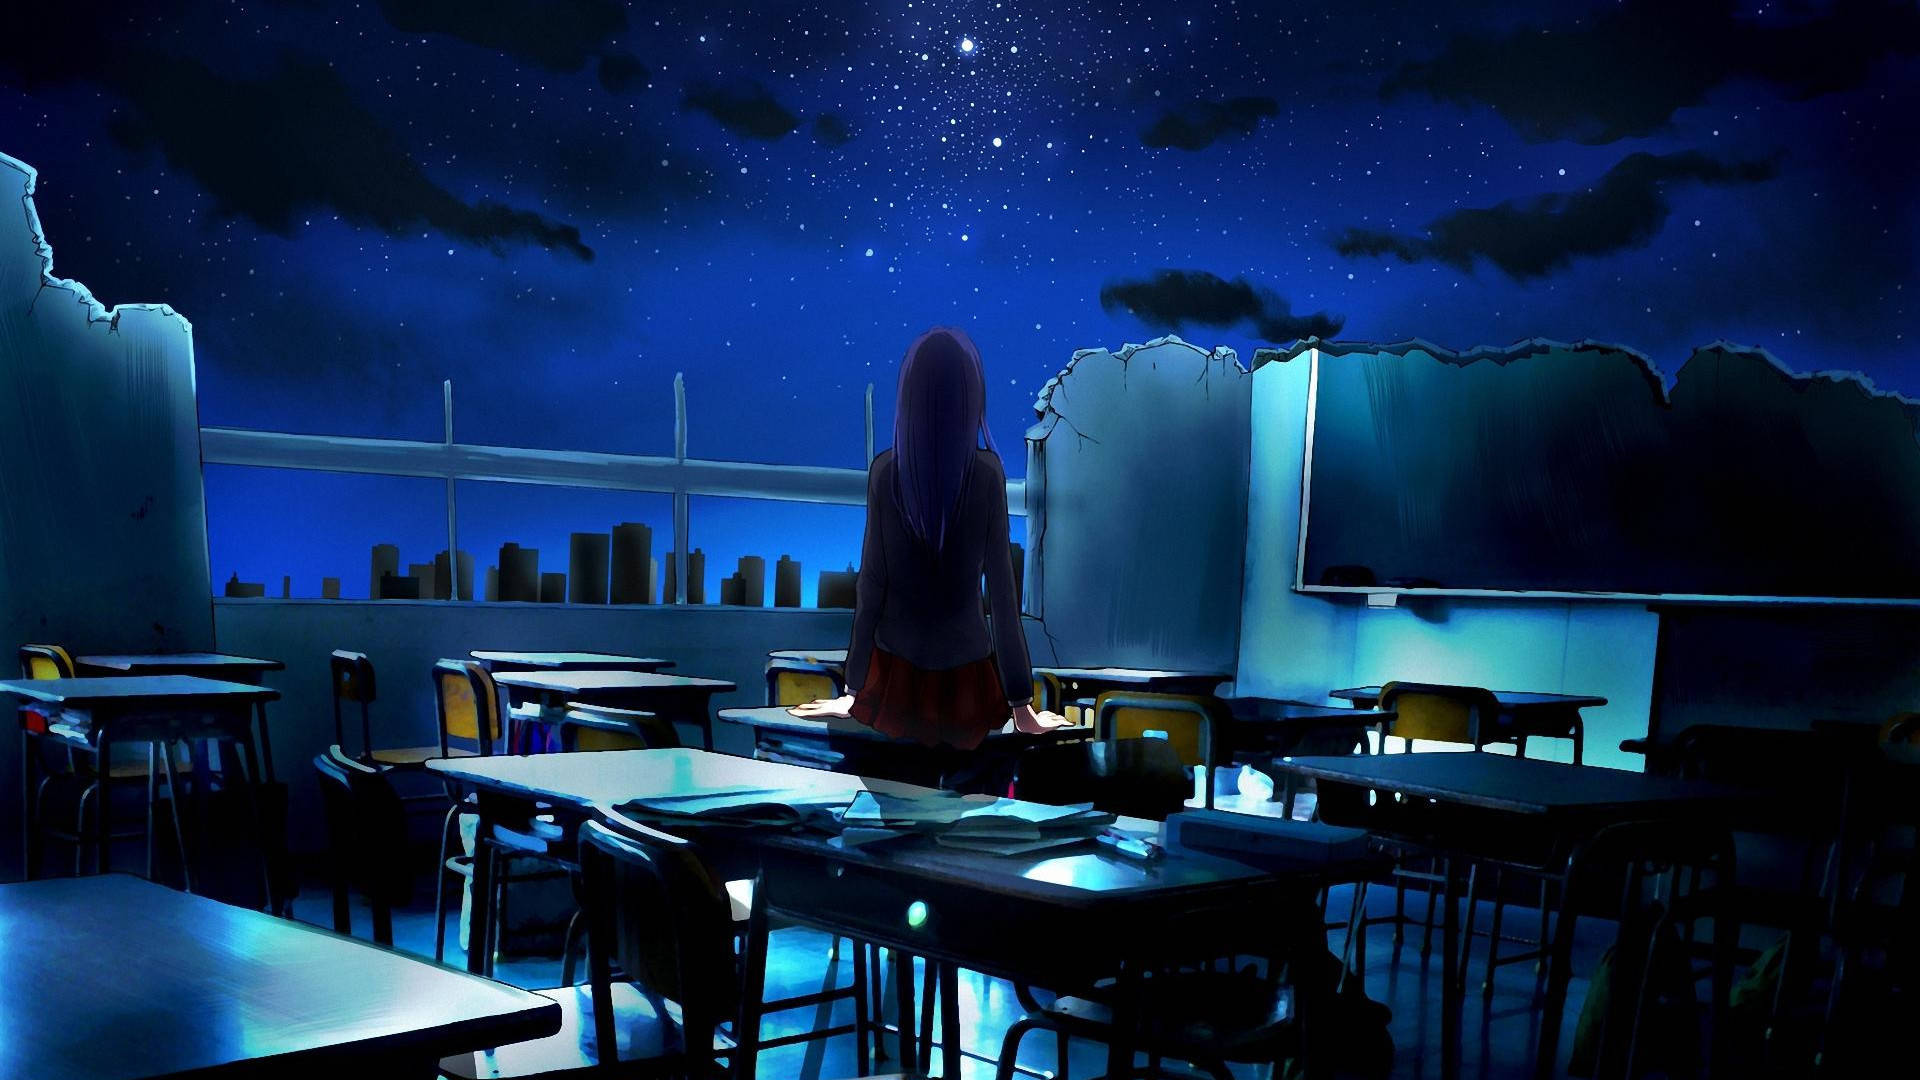 Anime Classroom In Destroyed Building Wallpaper